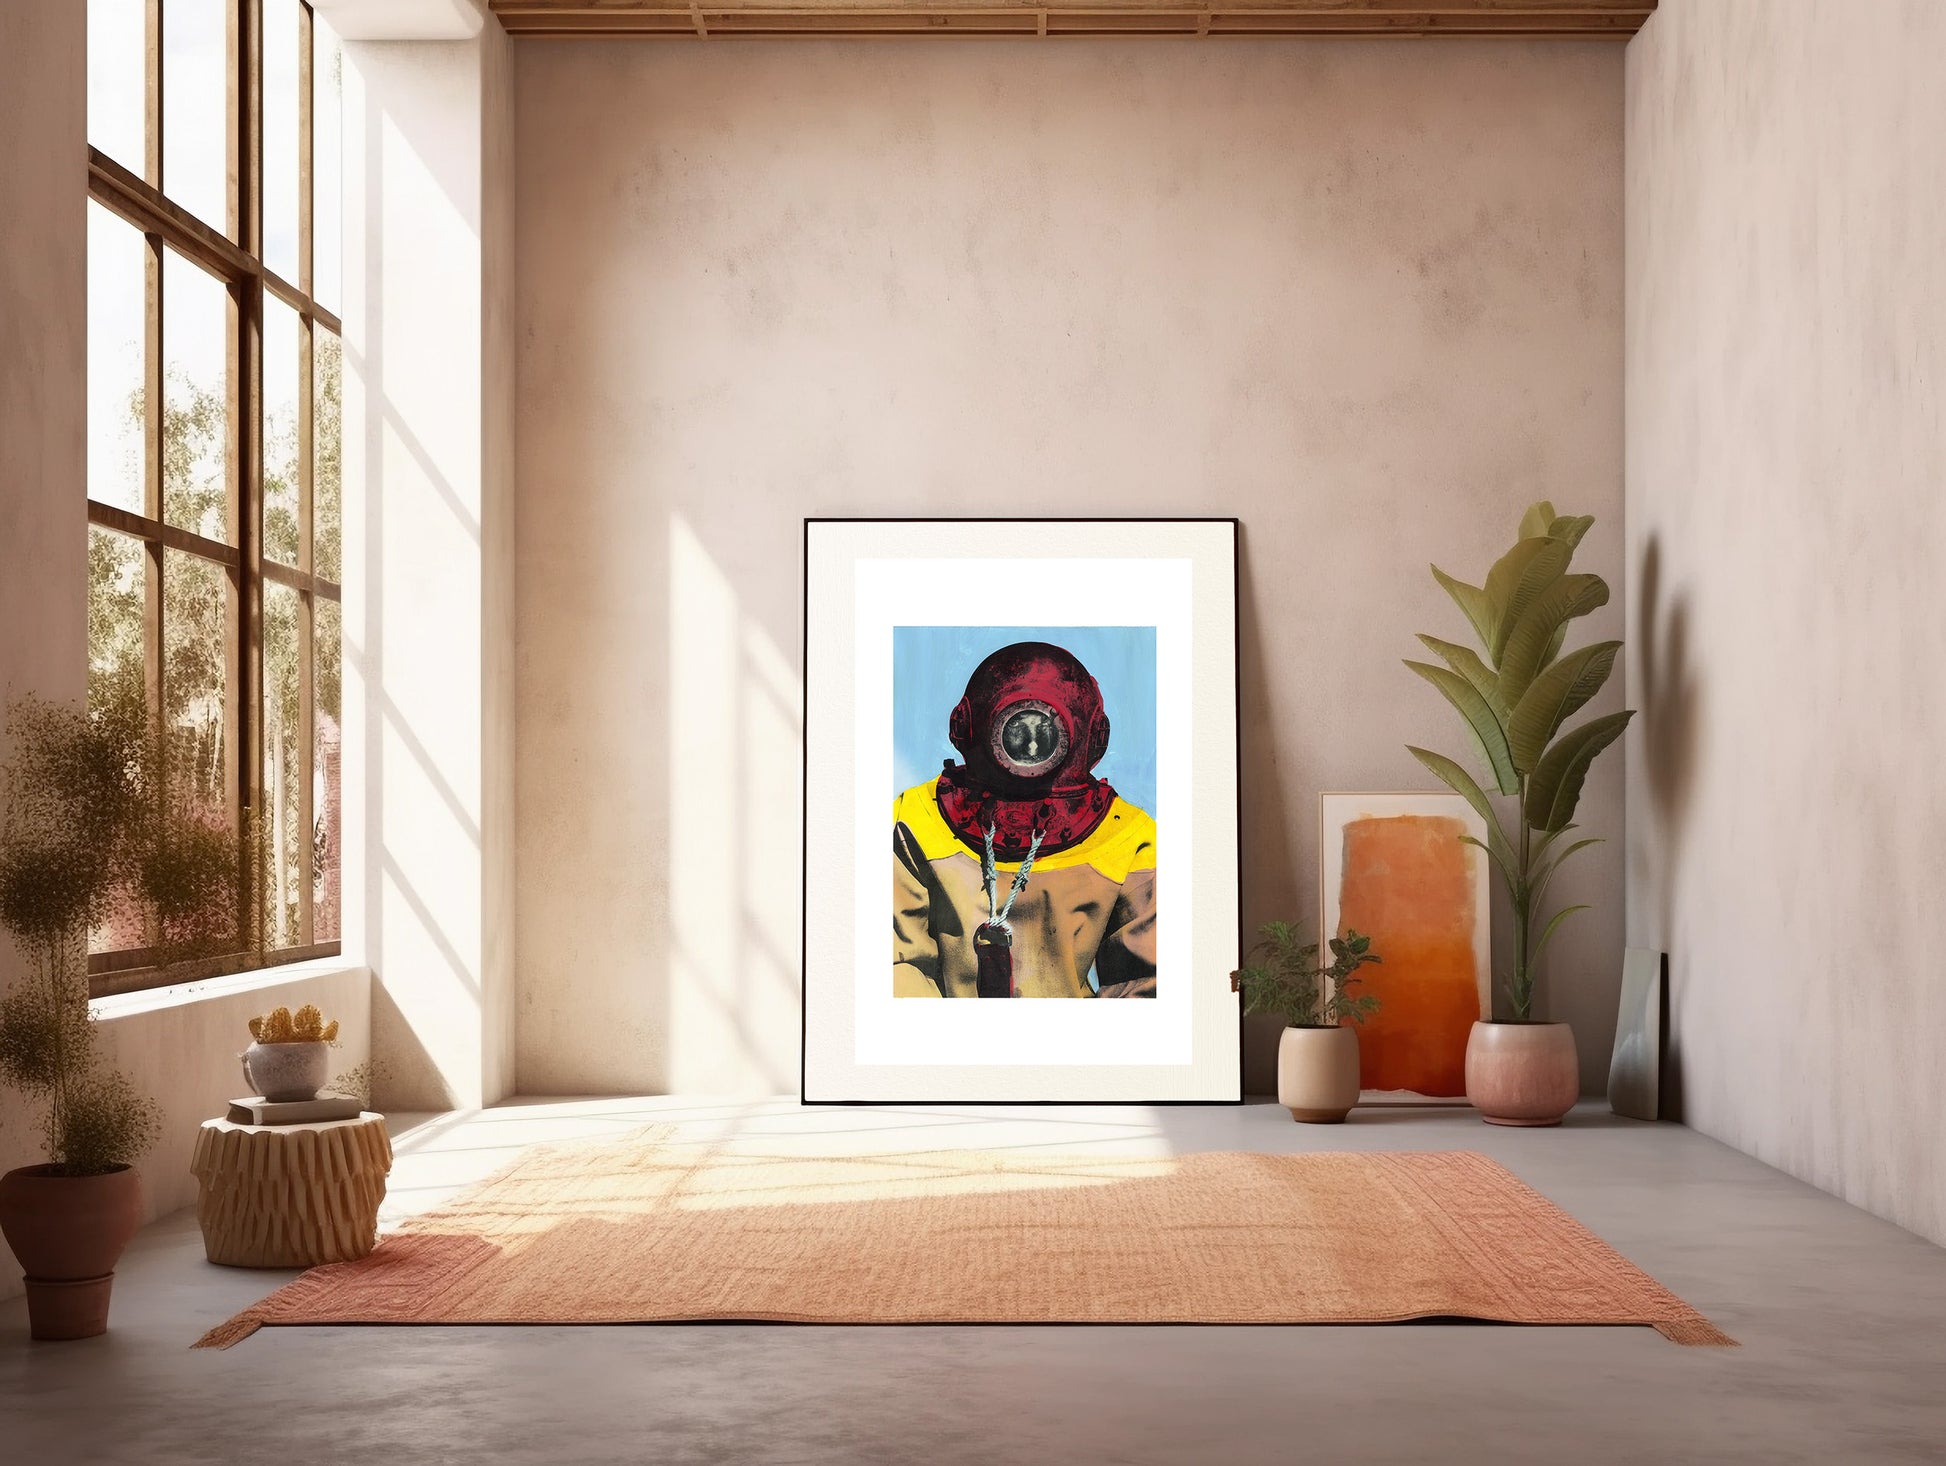 Painting Pop Art Wall Art from Greece | Baby blue & red sponge diver from Kalymnos island, by George Tatakis - inside a sunlight room